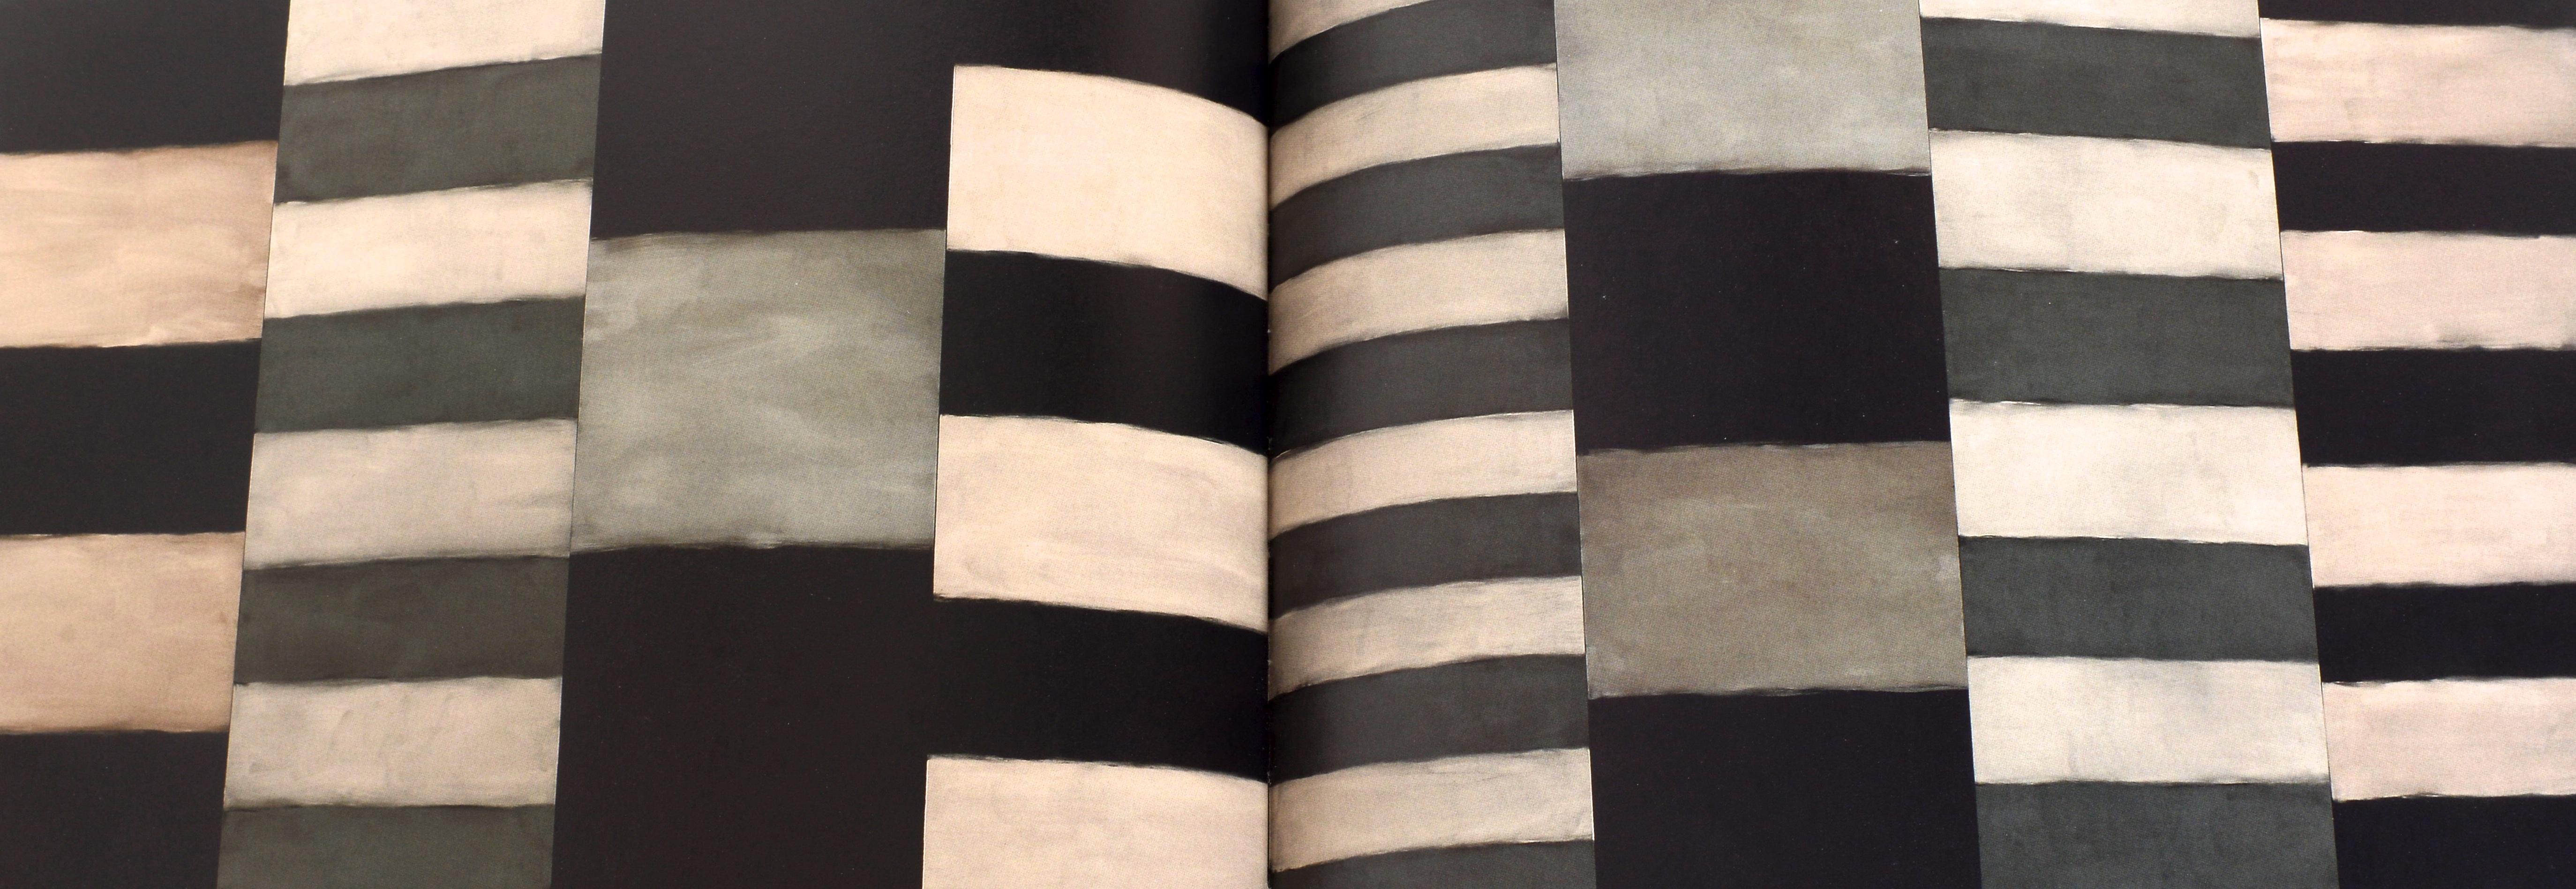 Sean Scully: Night and Day by Sean Scully & John Yau. Published by Cheim & Read, 2013, Limited 1/2000 copies. 1st Ed exhibition hardcover catalog ( Cheim & Read Gallery New York, 30 Oct. 2013-11 Jan. 2014) with parchment dust jacket. Sean Scully